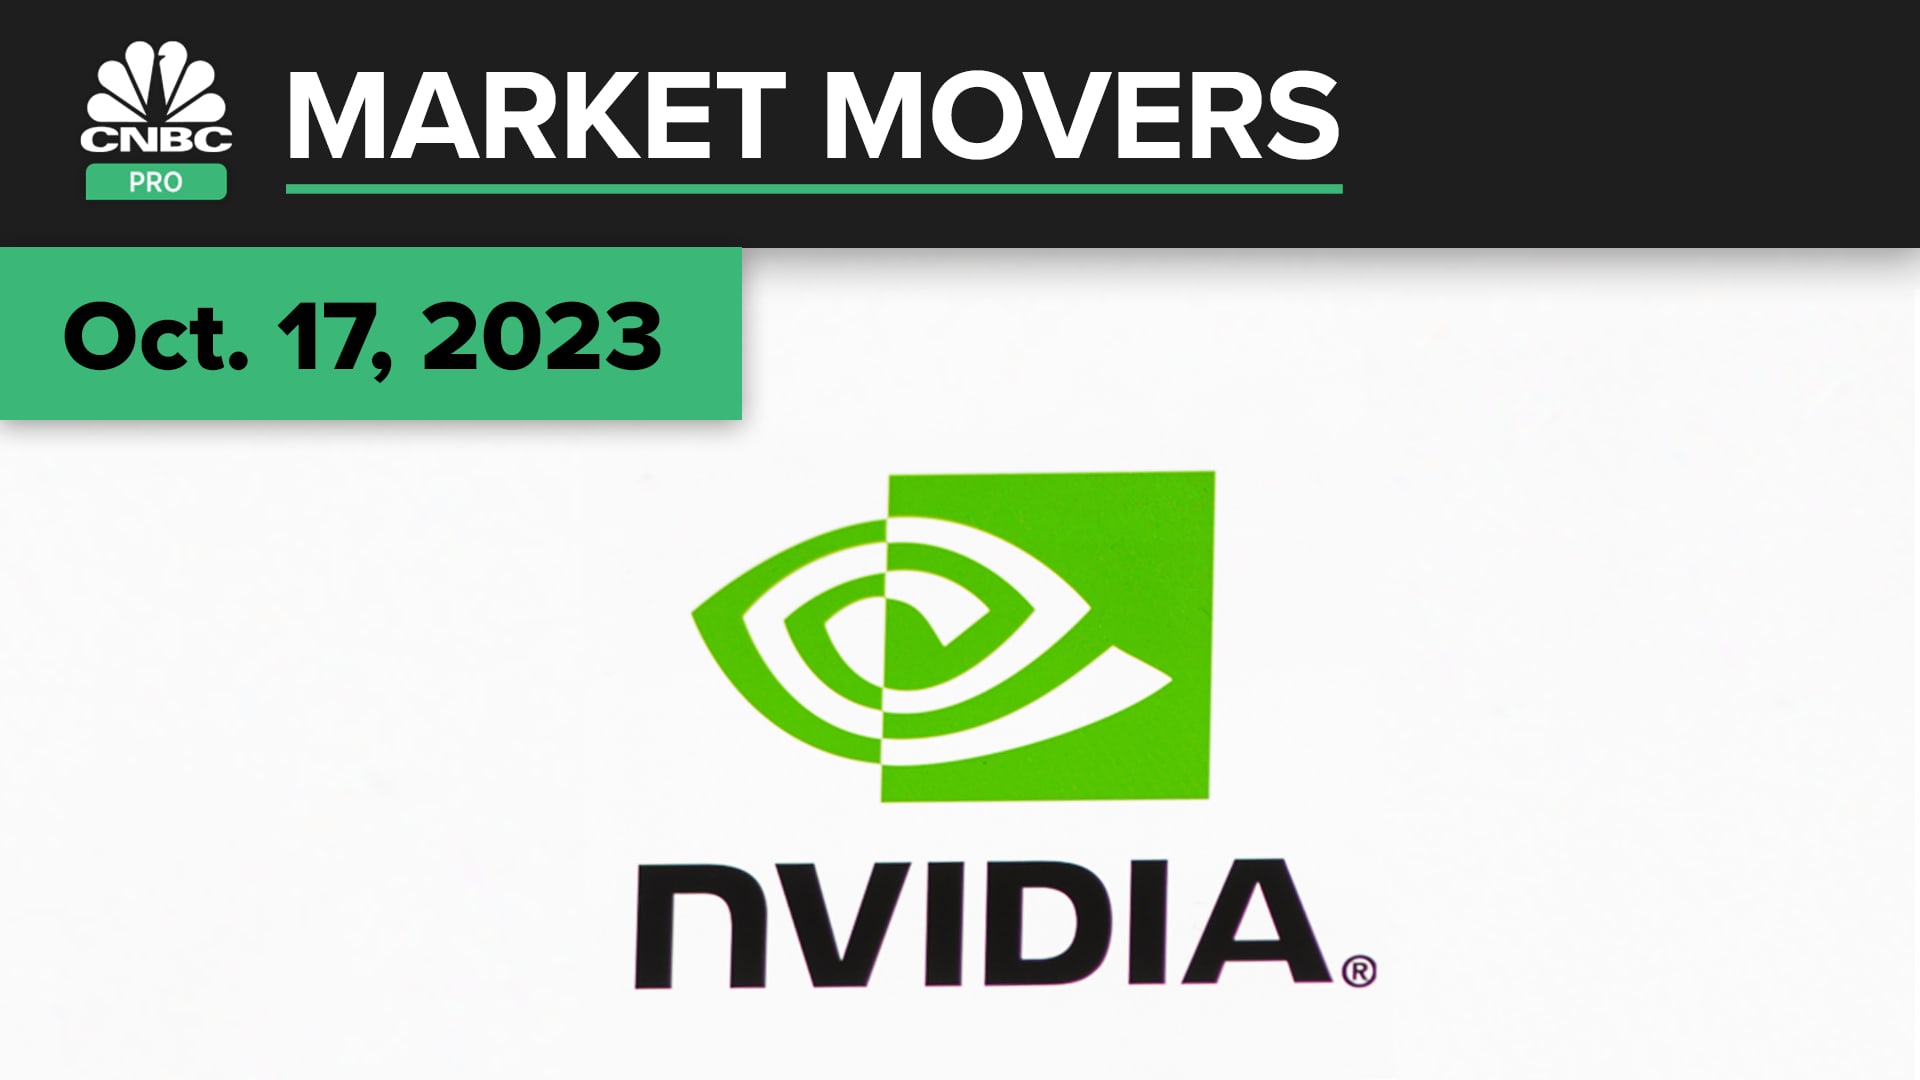 Nvidia shares dip after U.S. announces new curbs on AI chip exports to China. How to play the stock